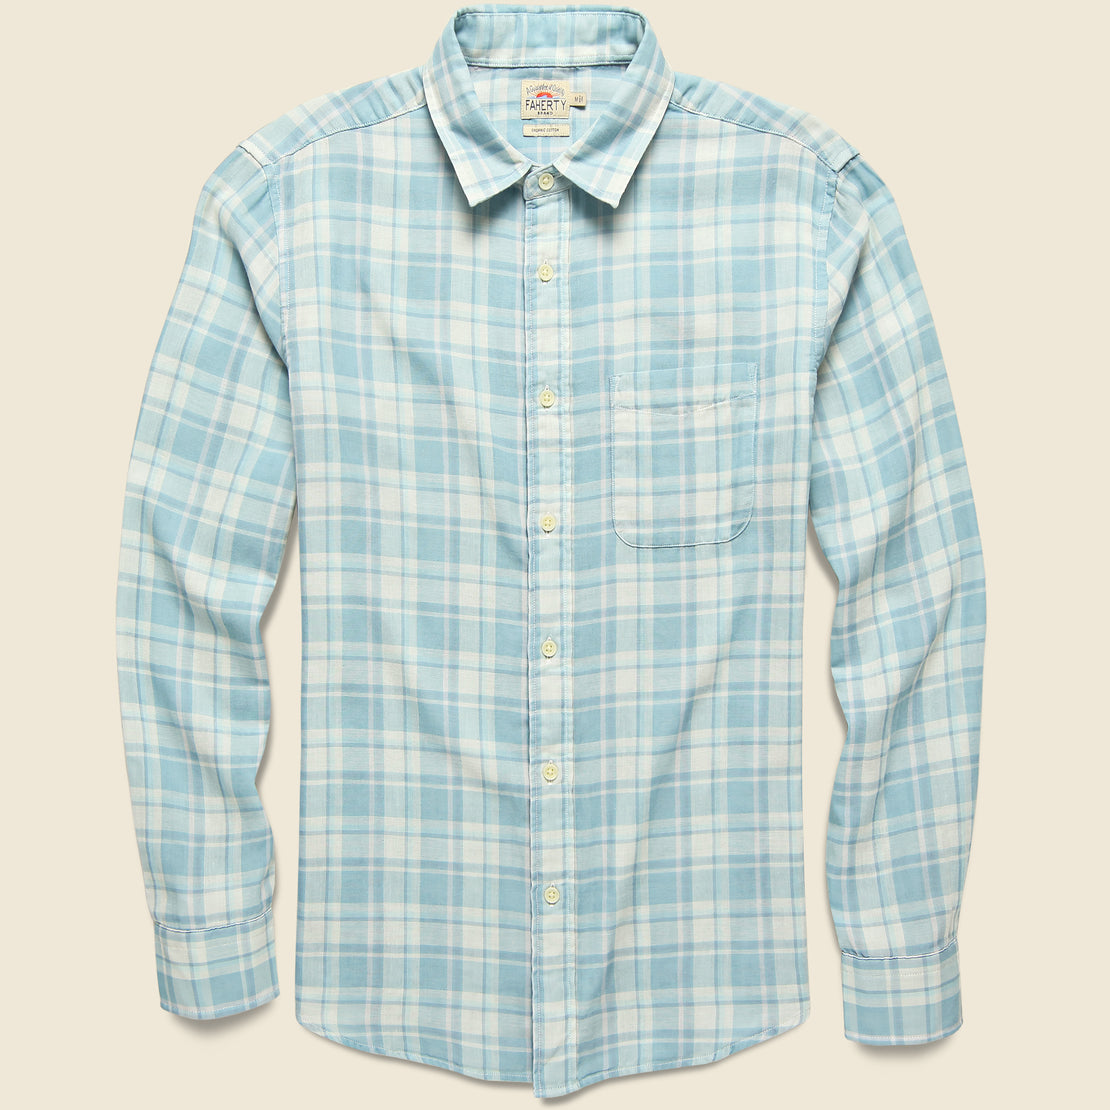 Faherty The Chill Doublecloth Shirt - Dana Point Plaid